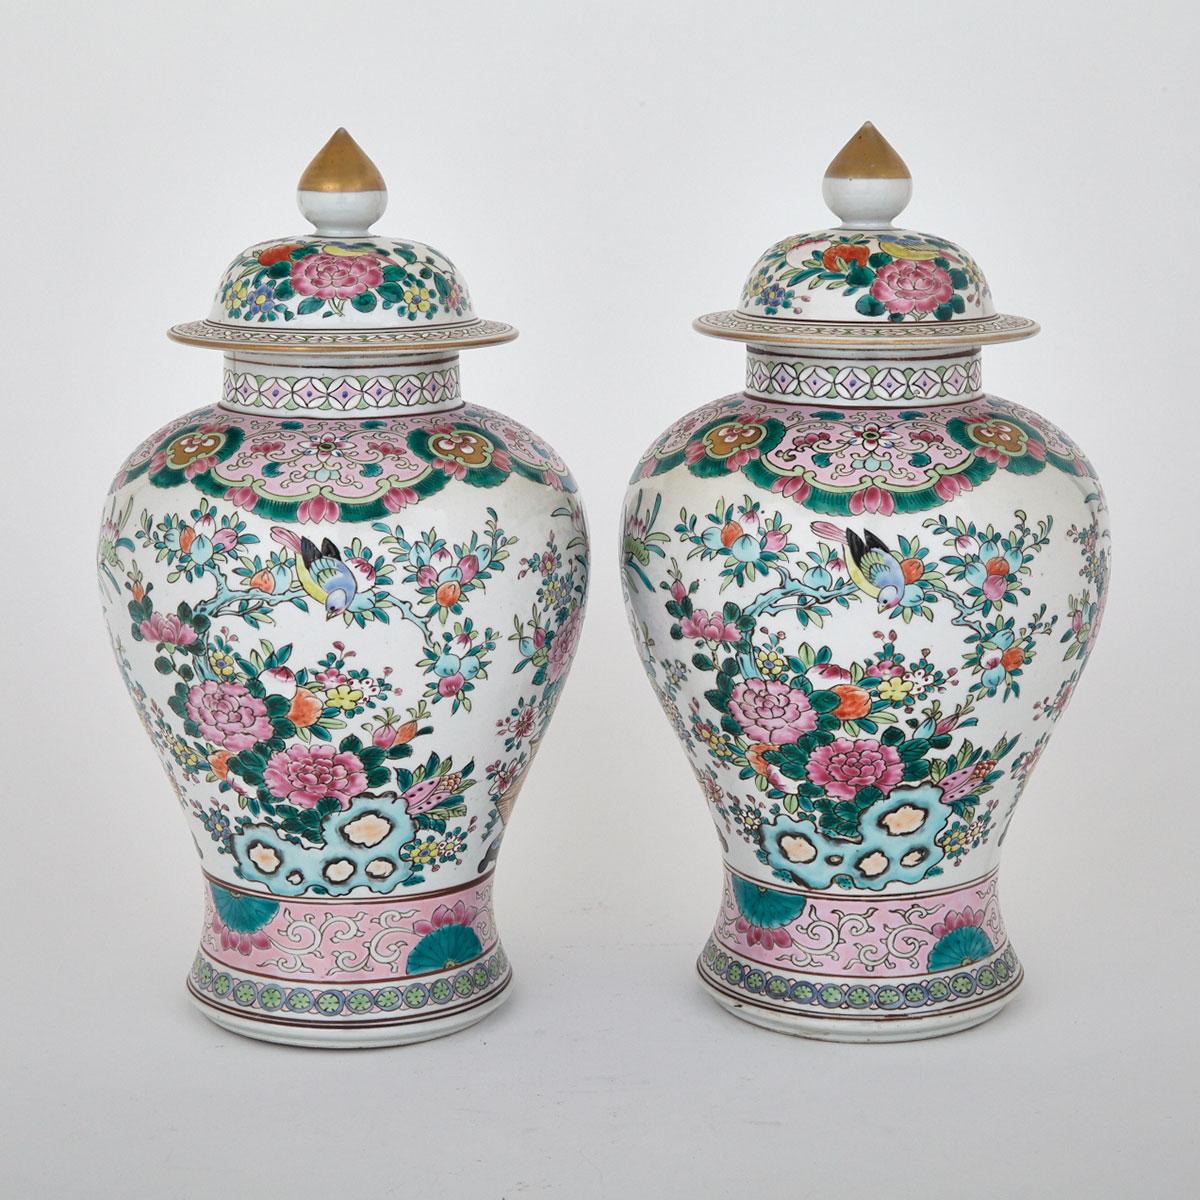 Pair of Samson Ginger Jars and Covers, France, 19th/20th Century